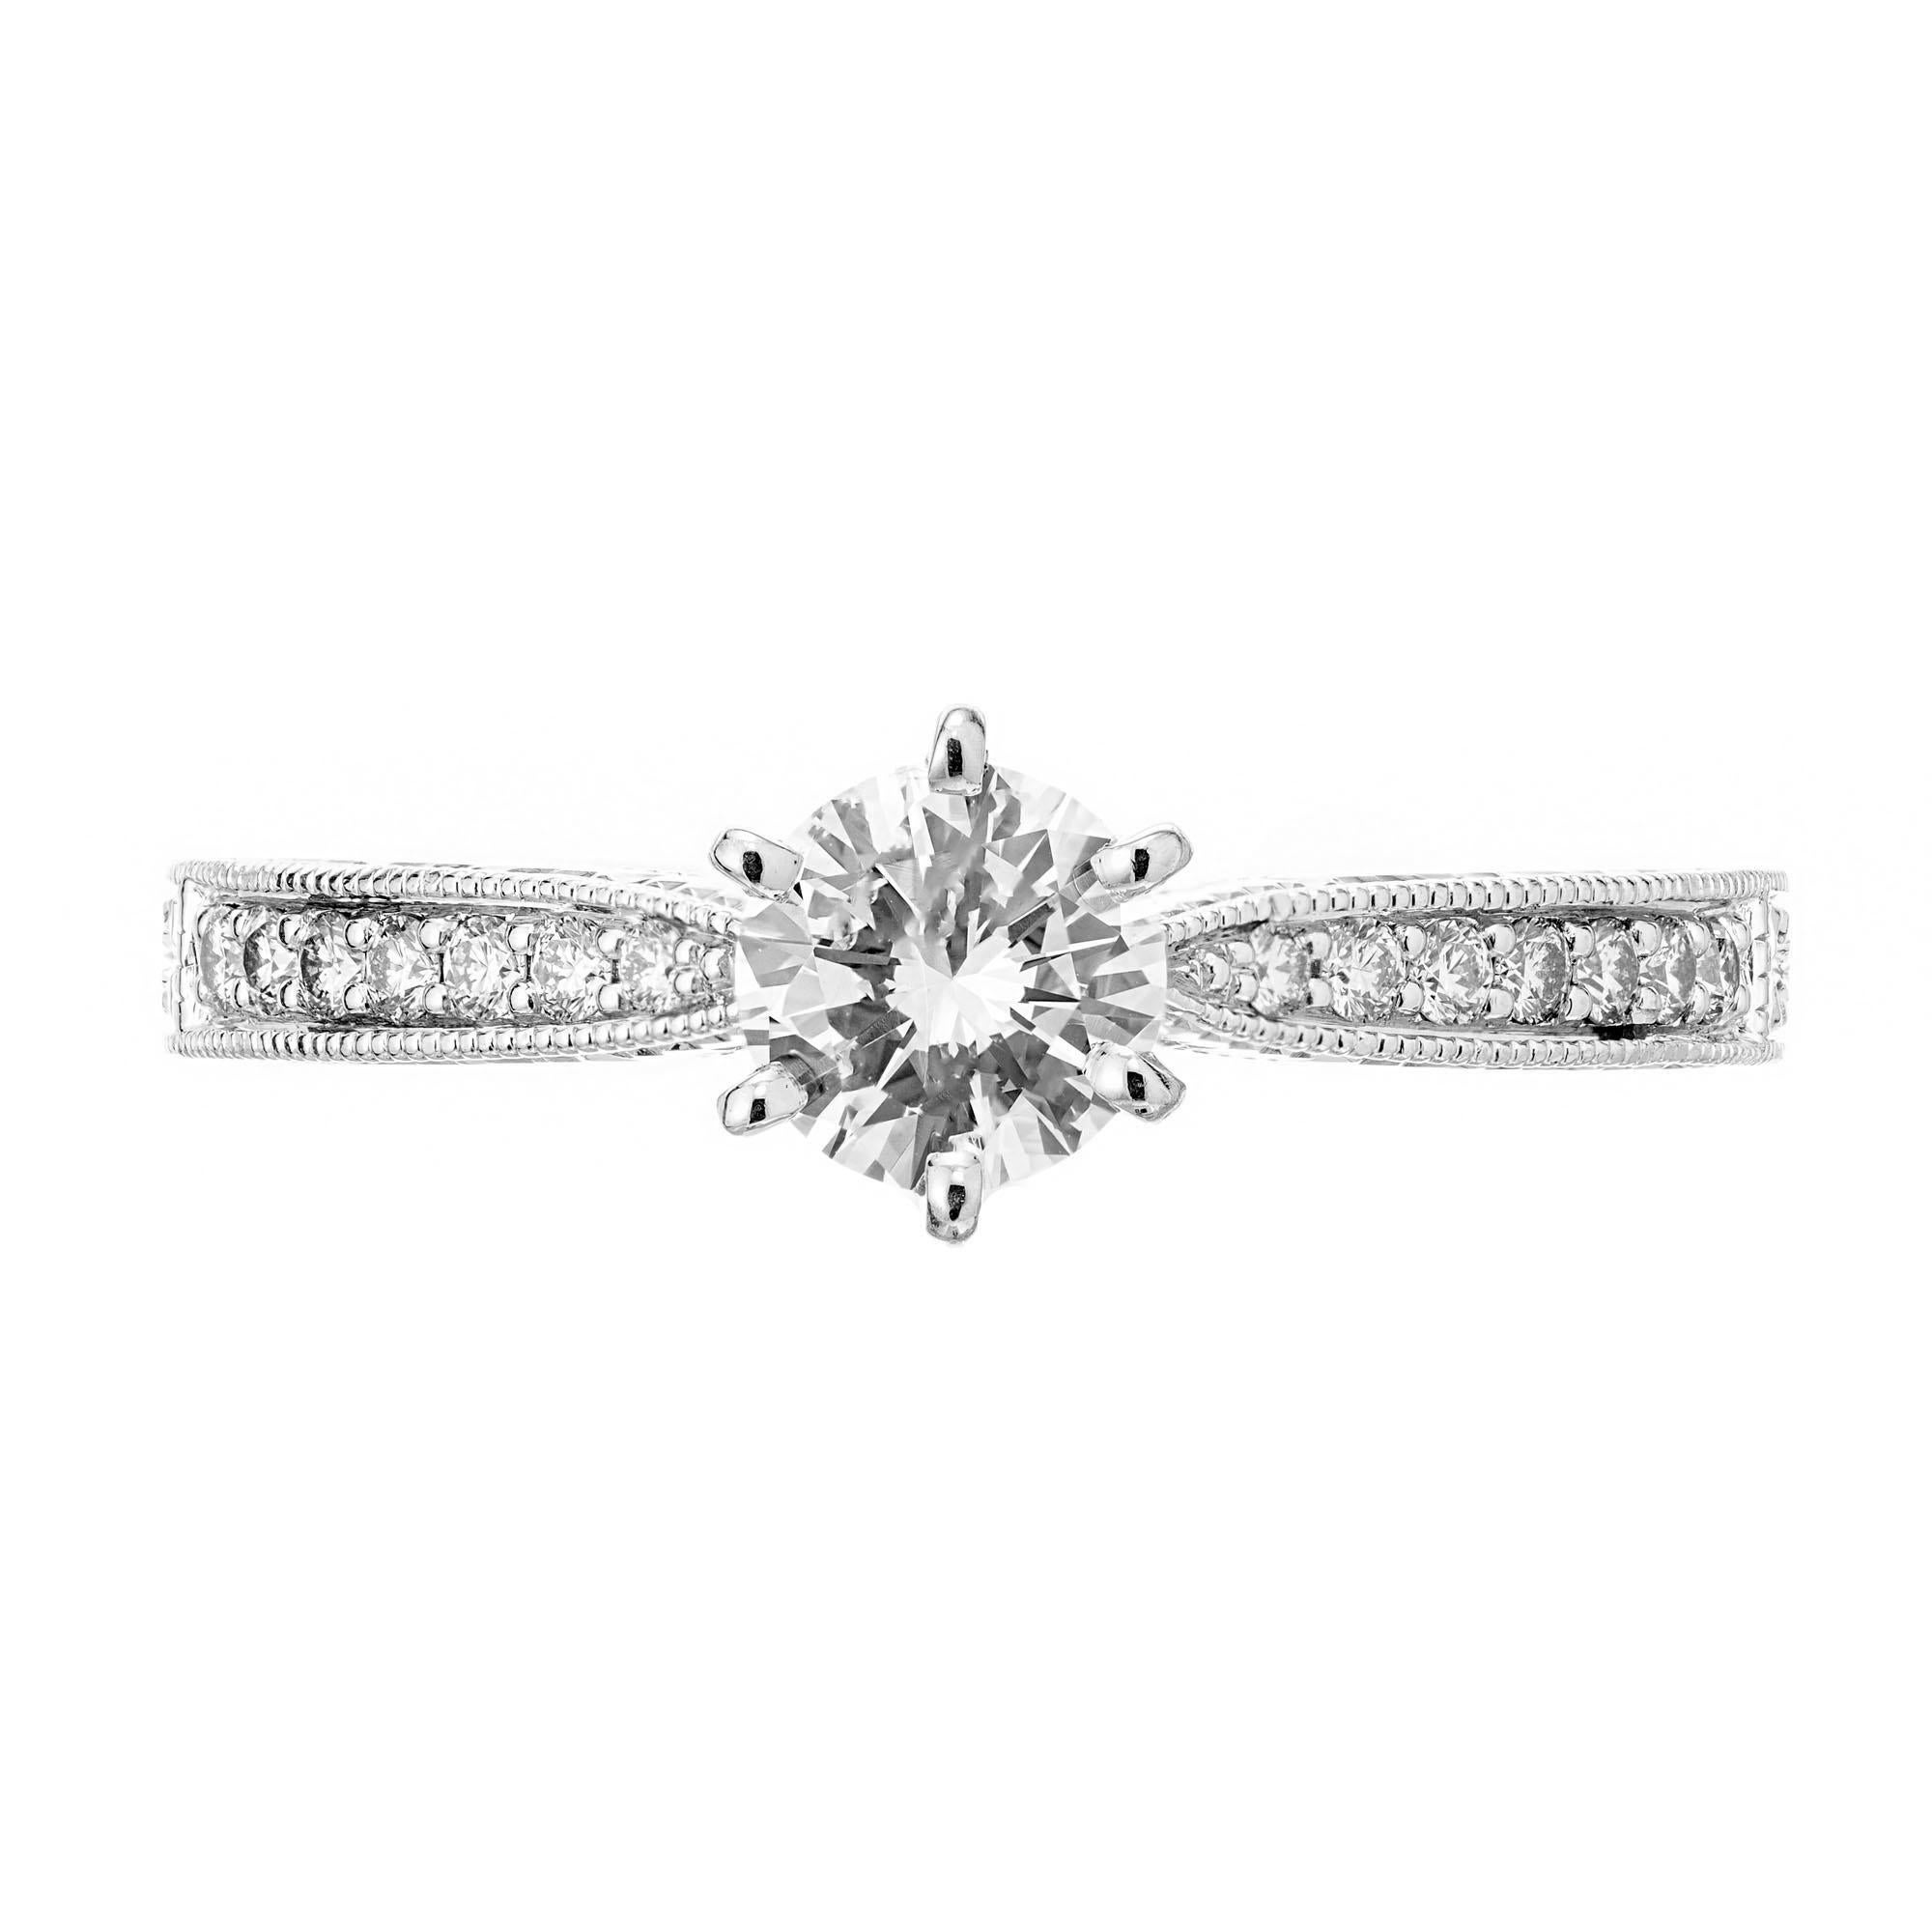 Simple classic six prong Diamond engagement ring with bead set diamond sides and hand engraving. EGL certified round brilliant cut center stone. 

1 round brilliant cut diamond, approx. total weight .46cts, E to F, SI1, Depth: 59.1% Table: 63%. EGL